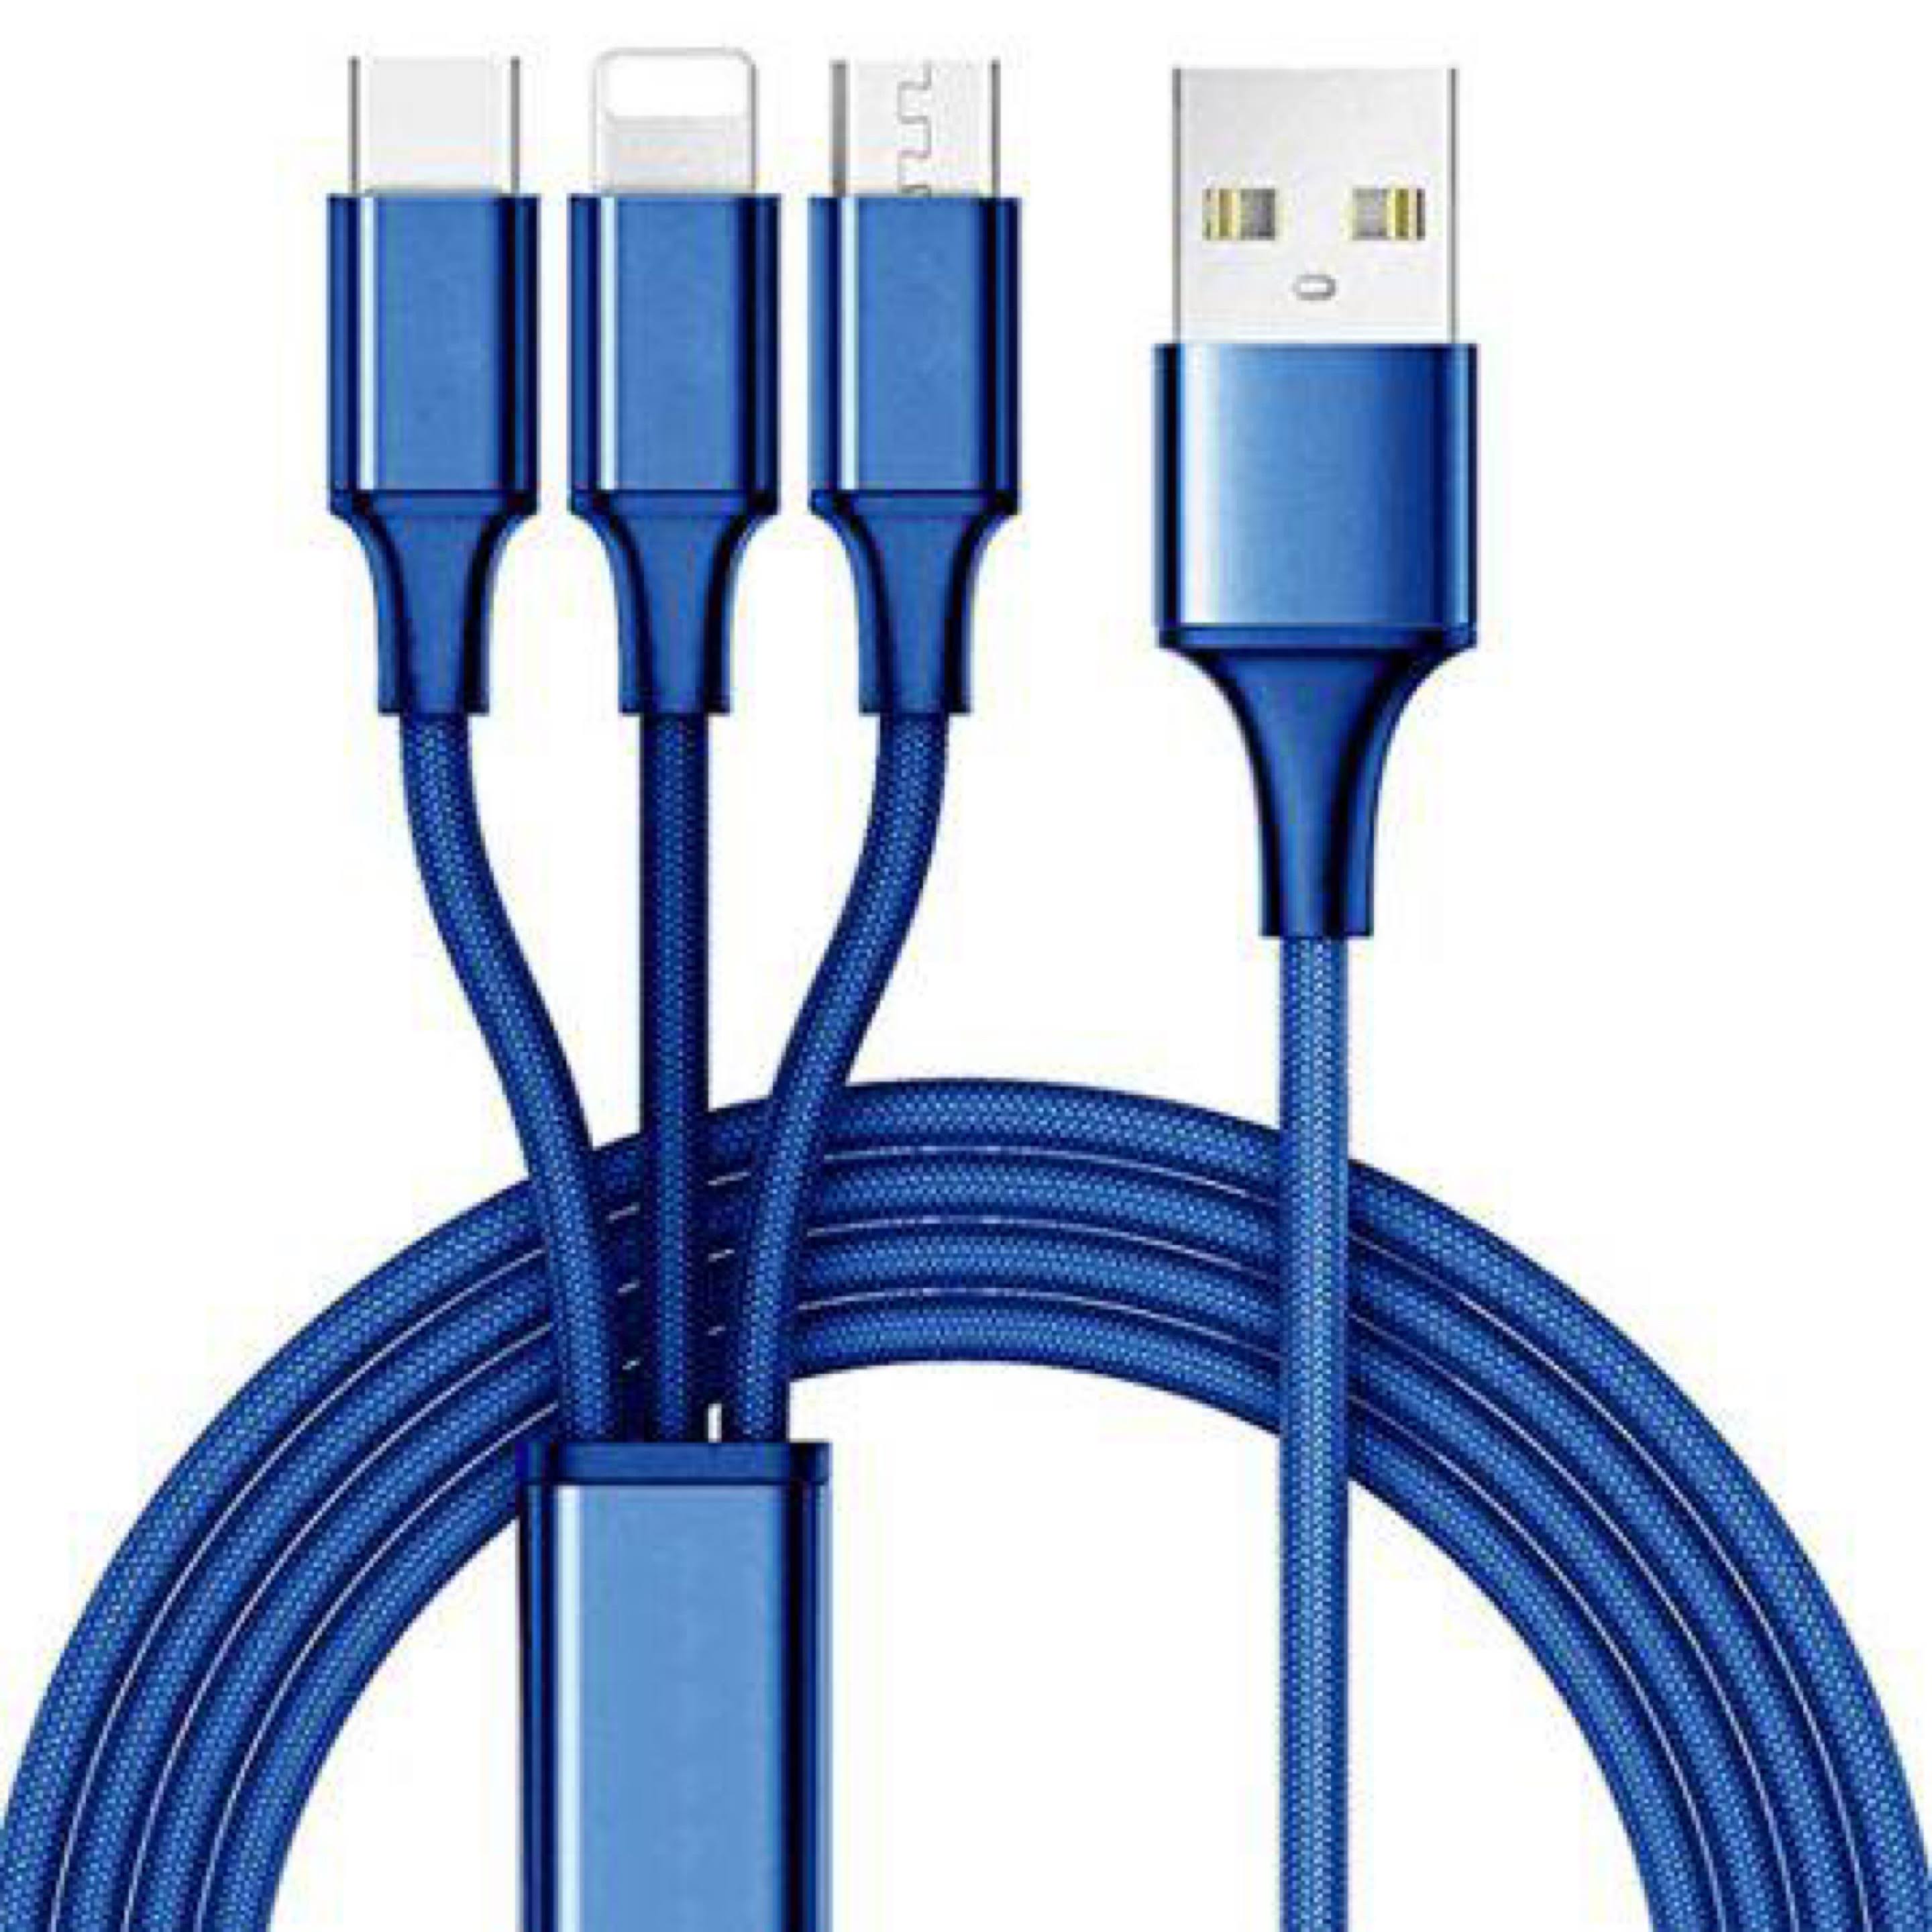 Boxed 10 Ft. 3-in-1 Usb Multi Charging Cable - Blue